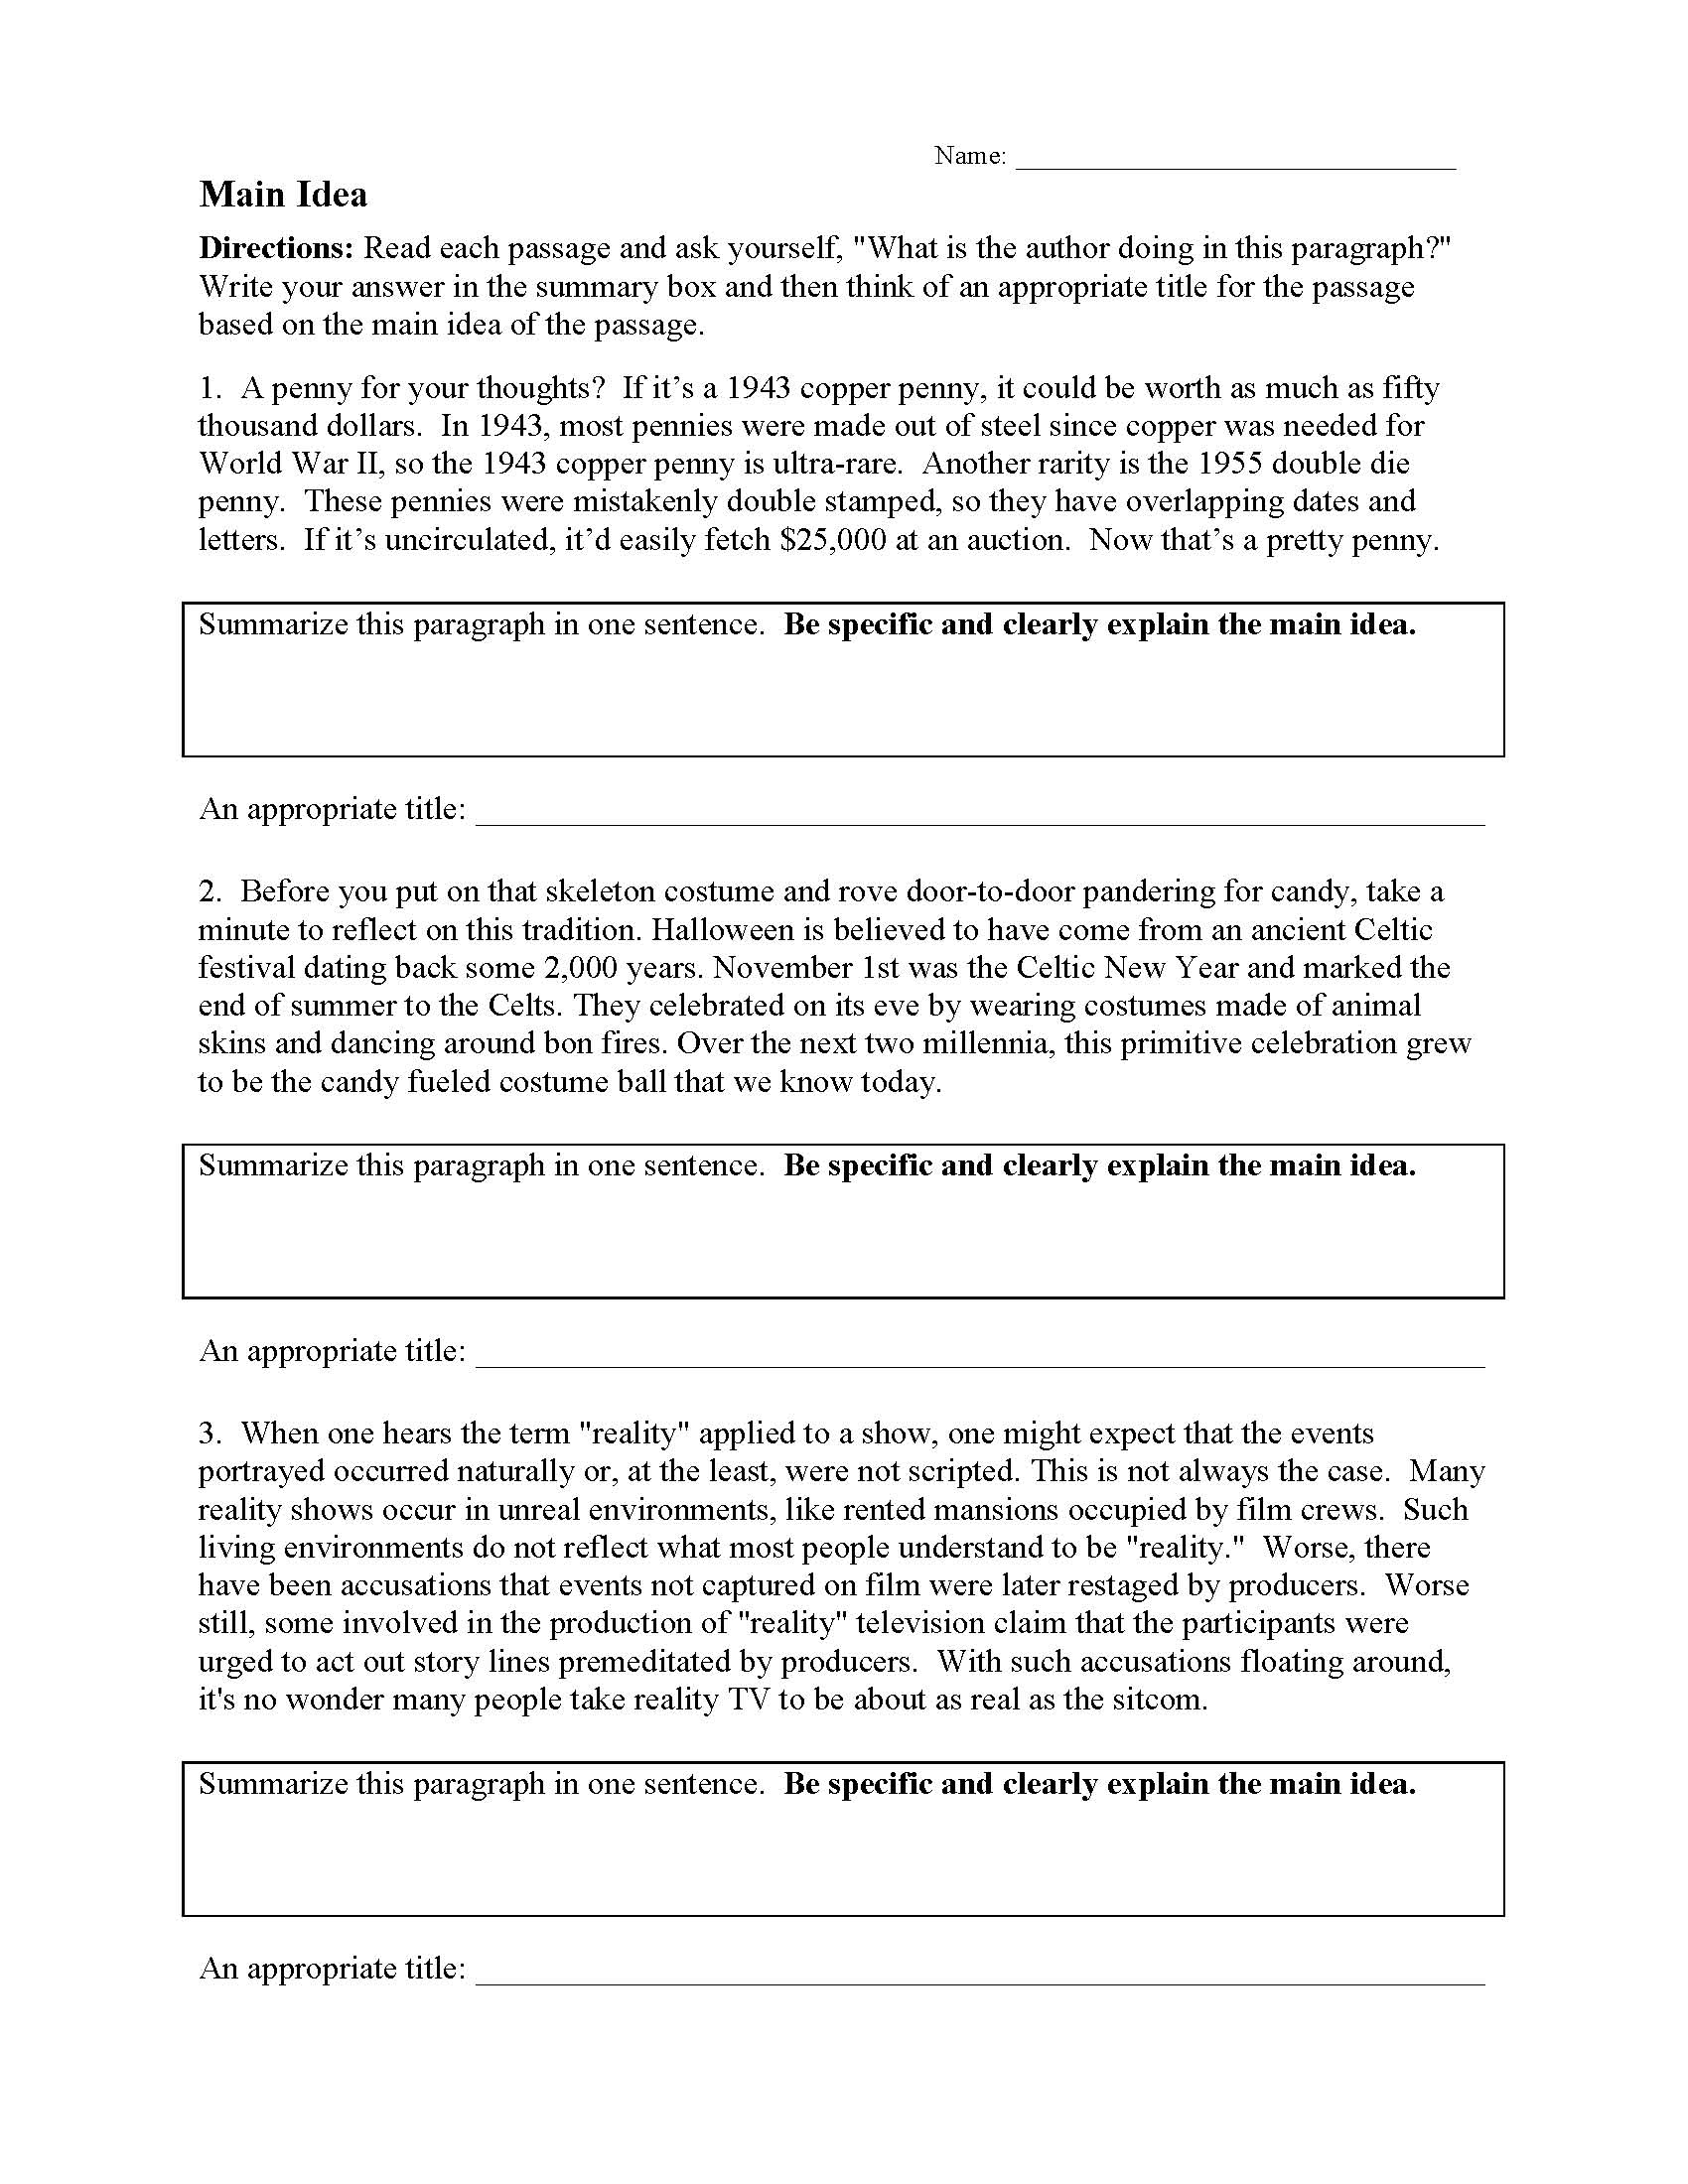 This is a preview image of Main Idea Worksheet 1. Click on it to enlarge it or view the source file.